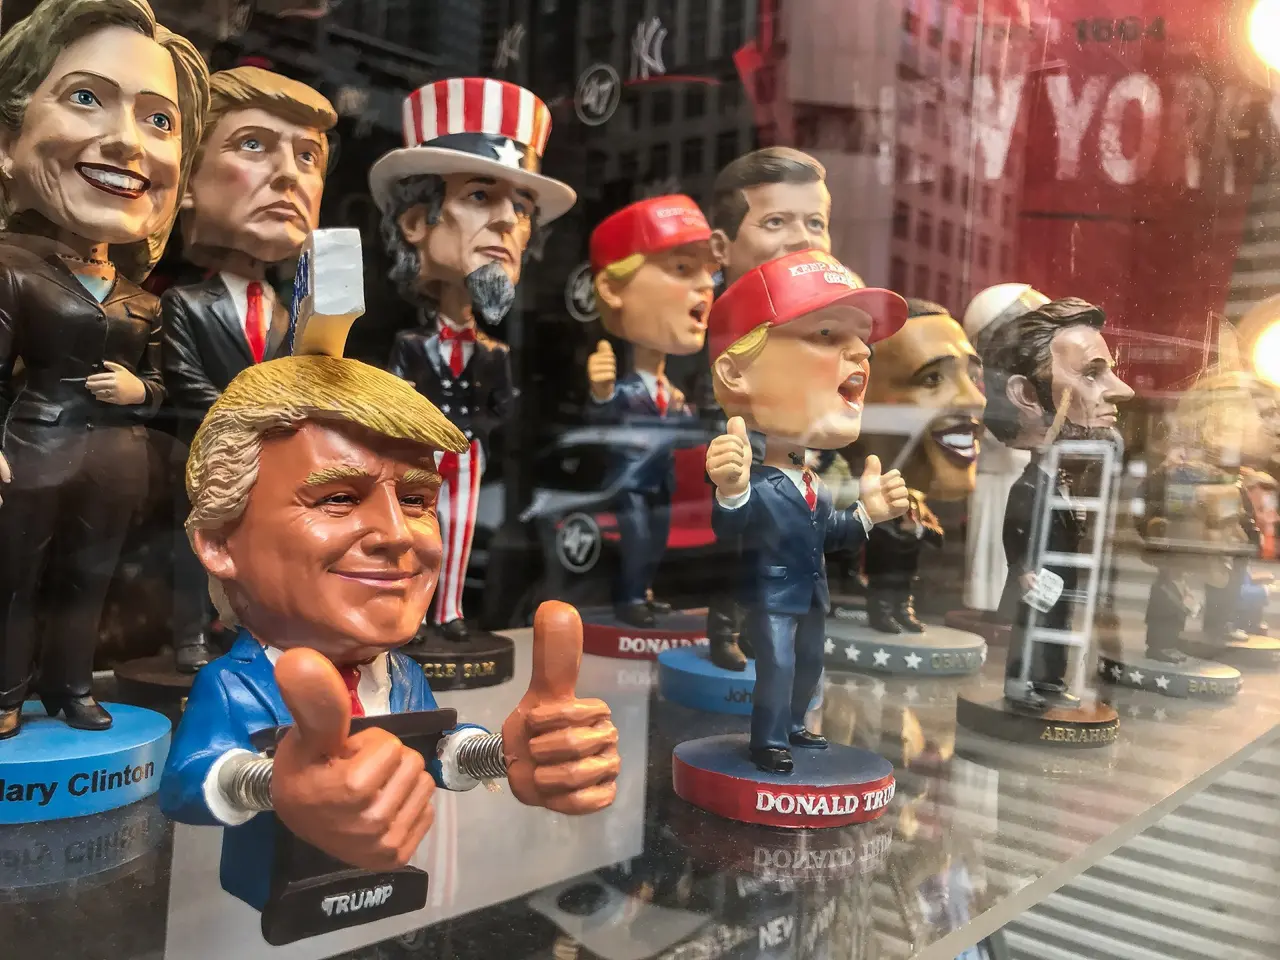 New York, 5/23/2019: Bobble head dolls of various political figures are seen on a gift shop's window display.